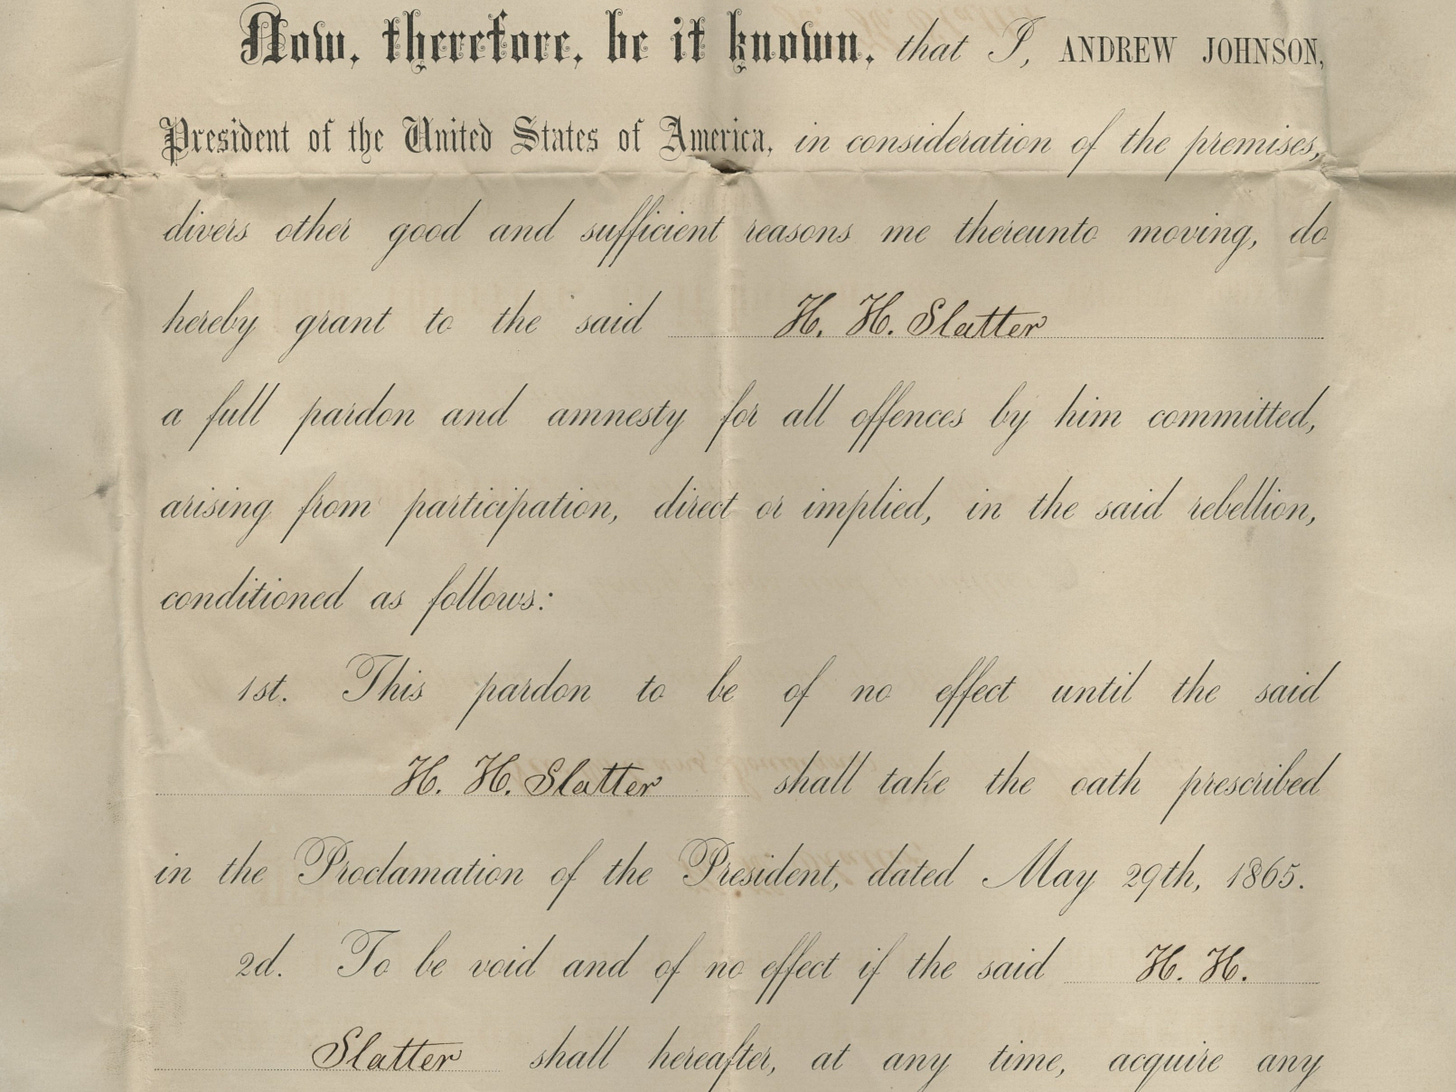 A scanned document marking President Andrew Johnson’s official pardon of Hope H. Slatter. It begins: “Now, therefore, be it known, that I, ANDREW JOHNSON, President of the United States of America, in consideration of the premises, divers other good and sufficient reasons me thereunto moving, do hereby grant to the said H. H. Slatter a full pardon and amnesty for all offences committed, arising from participation, direct or implied, in the said rebellion…”